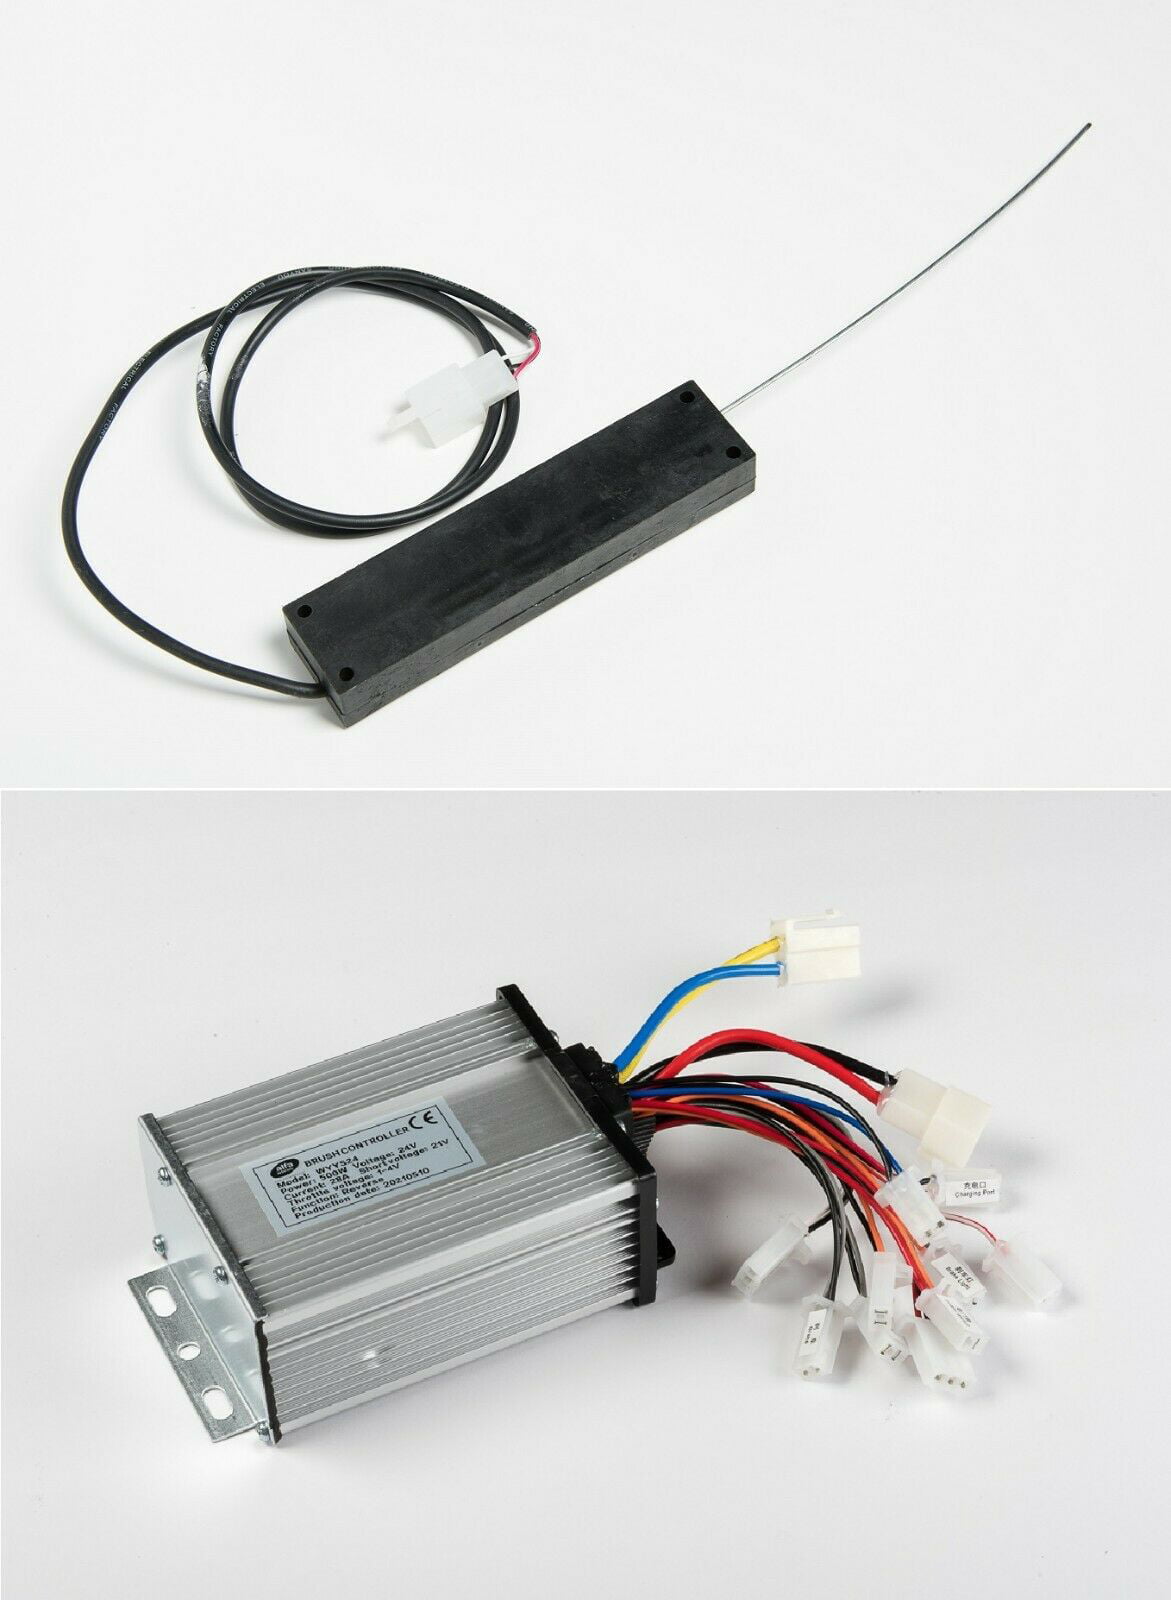 1000W 48V motor speed controller keylock Throttle charger for Scooter Trike ATV 